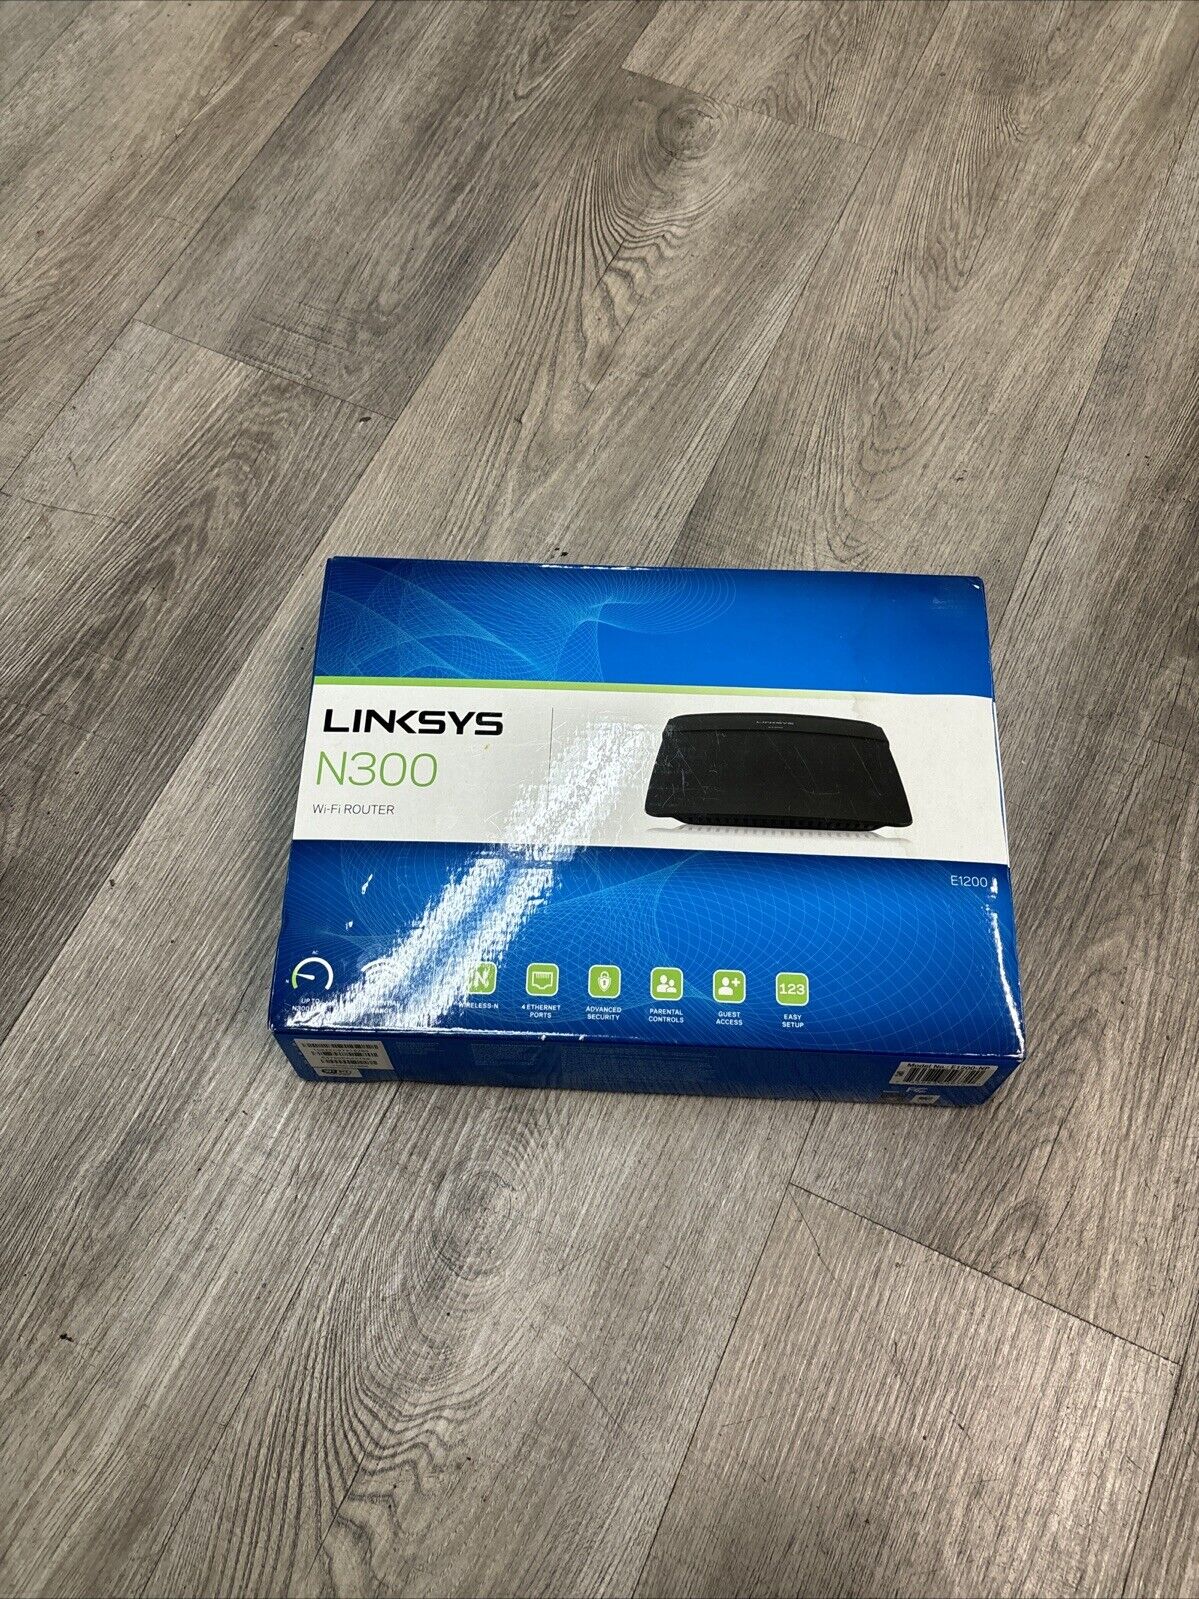 Cisco Linksys E1200 Wireless N300 Wi-Fi Router with set up CD in original box